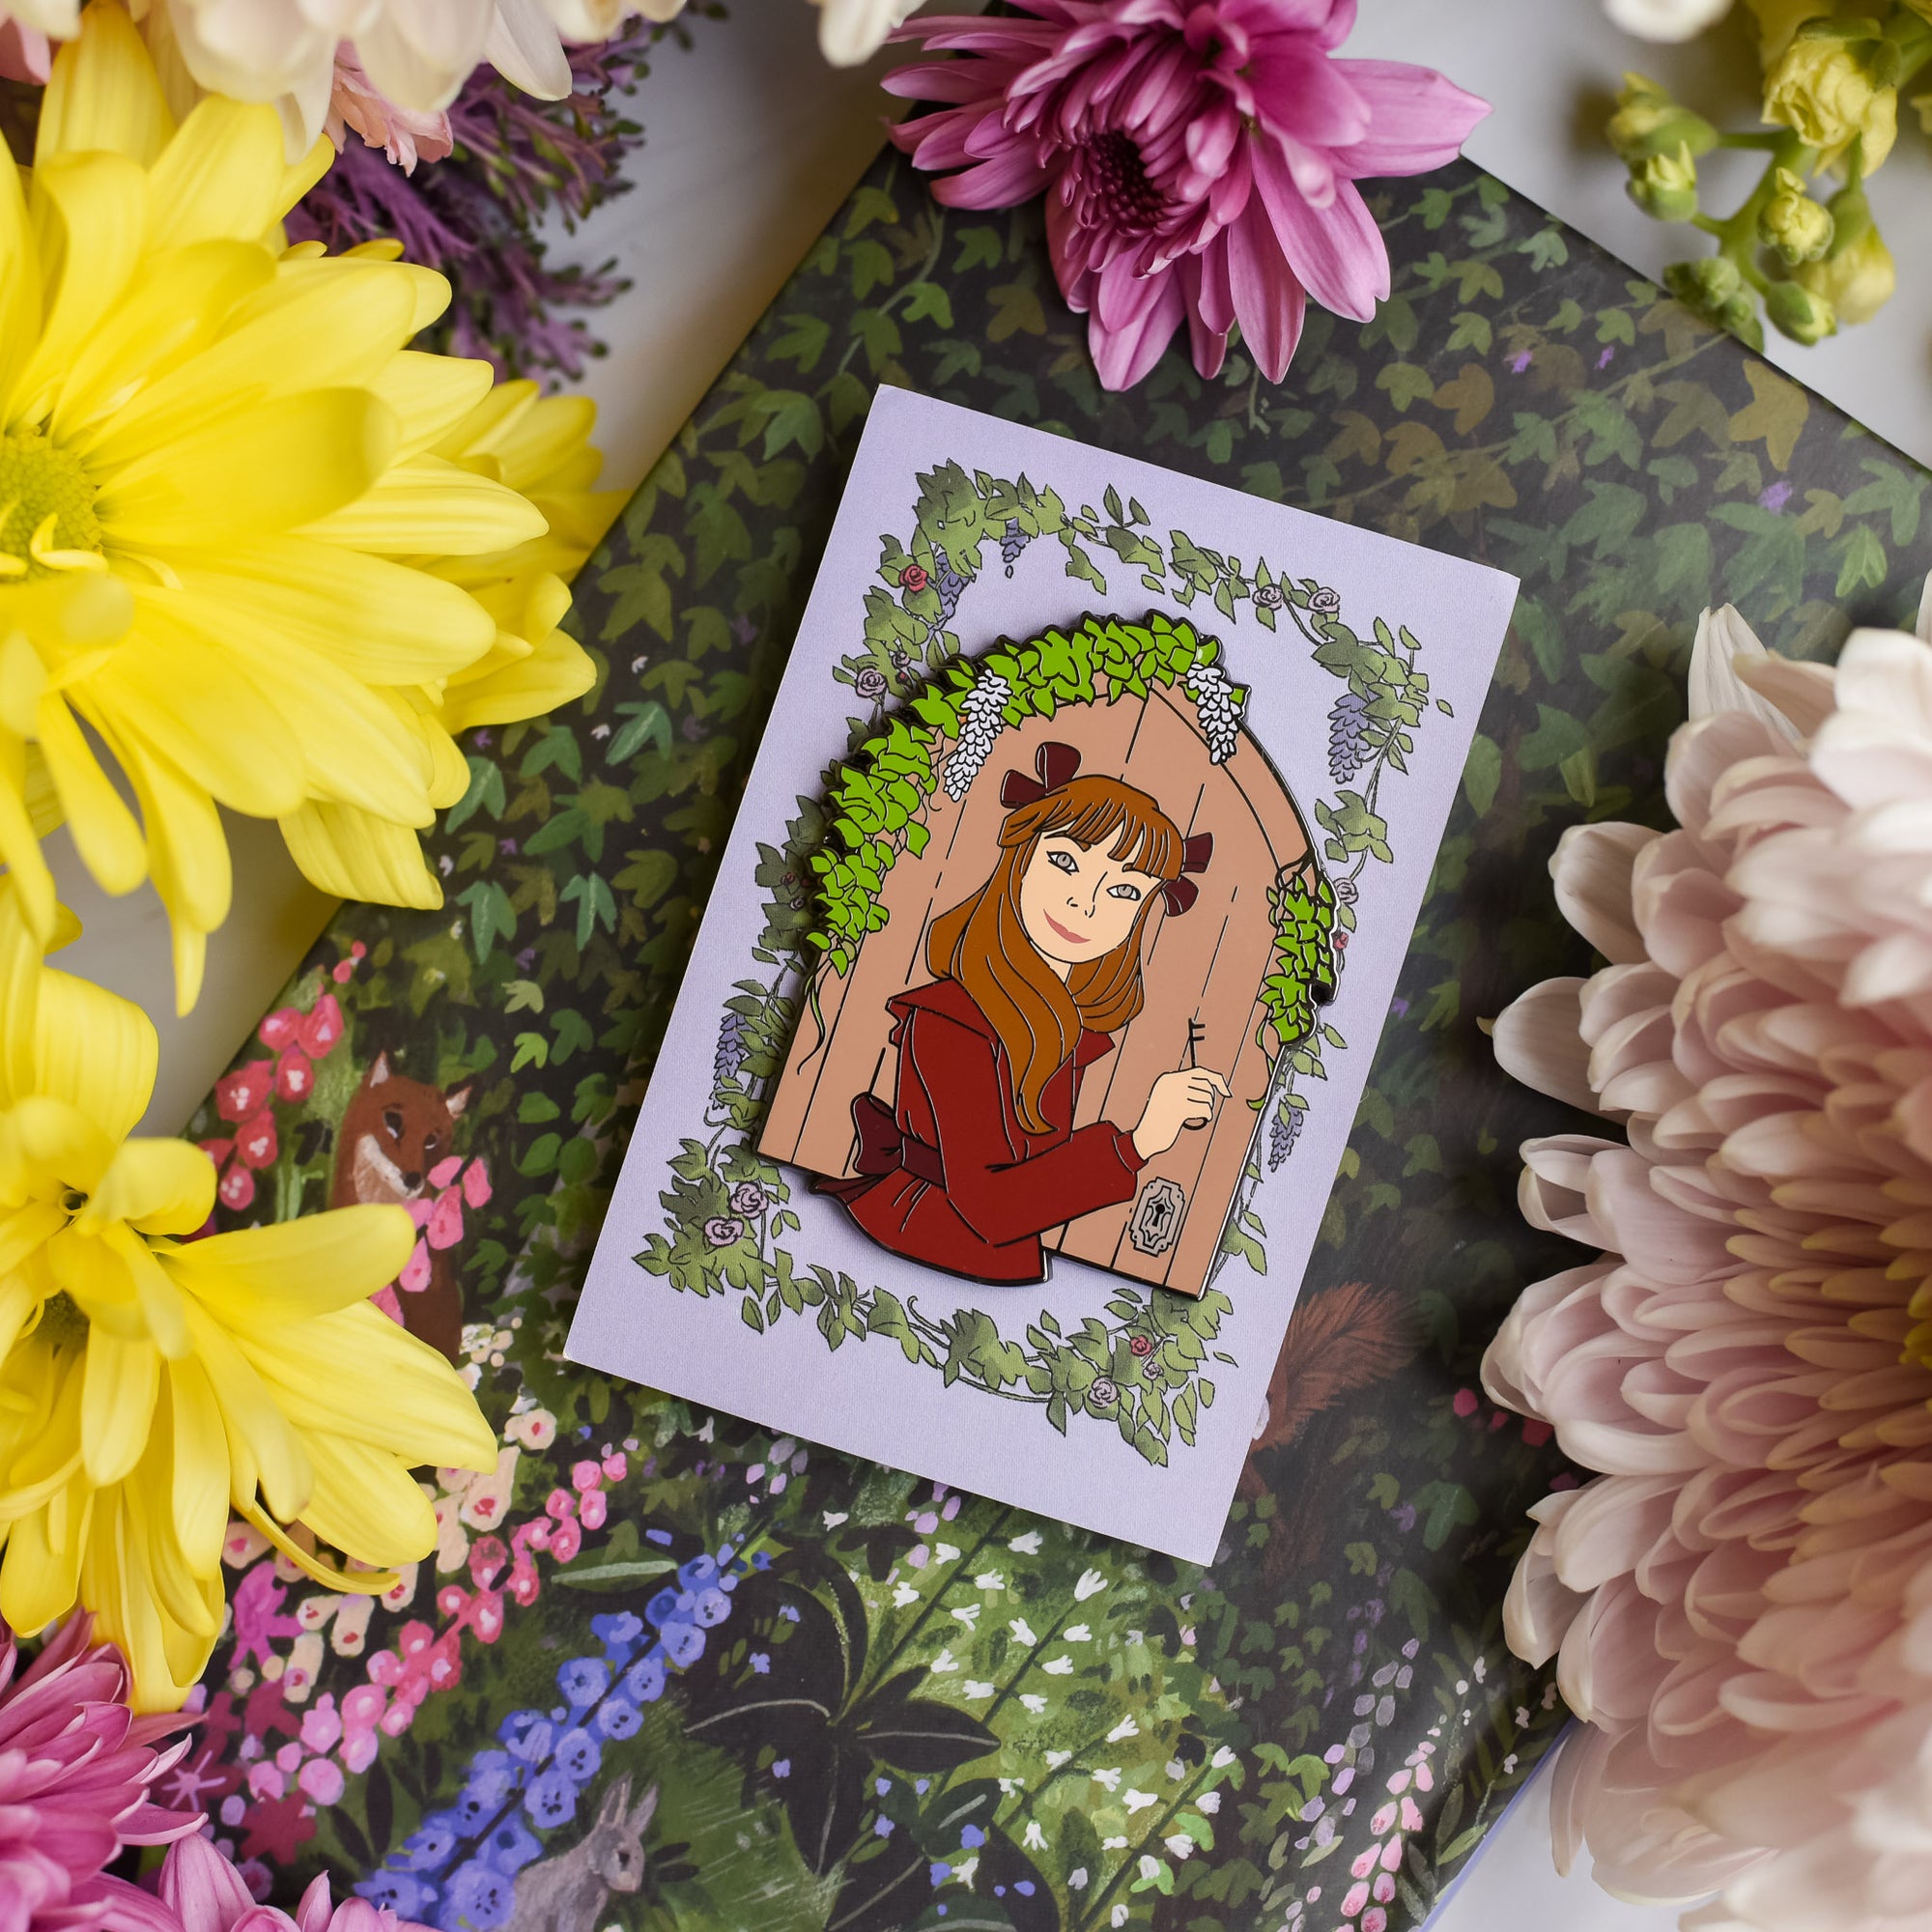 The Secret Garden Enamel Pin has Mary with a key standing in front of a door and surrounded by garden flowers